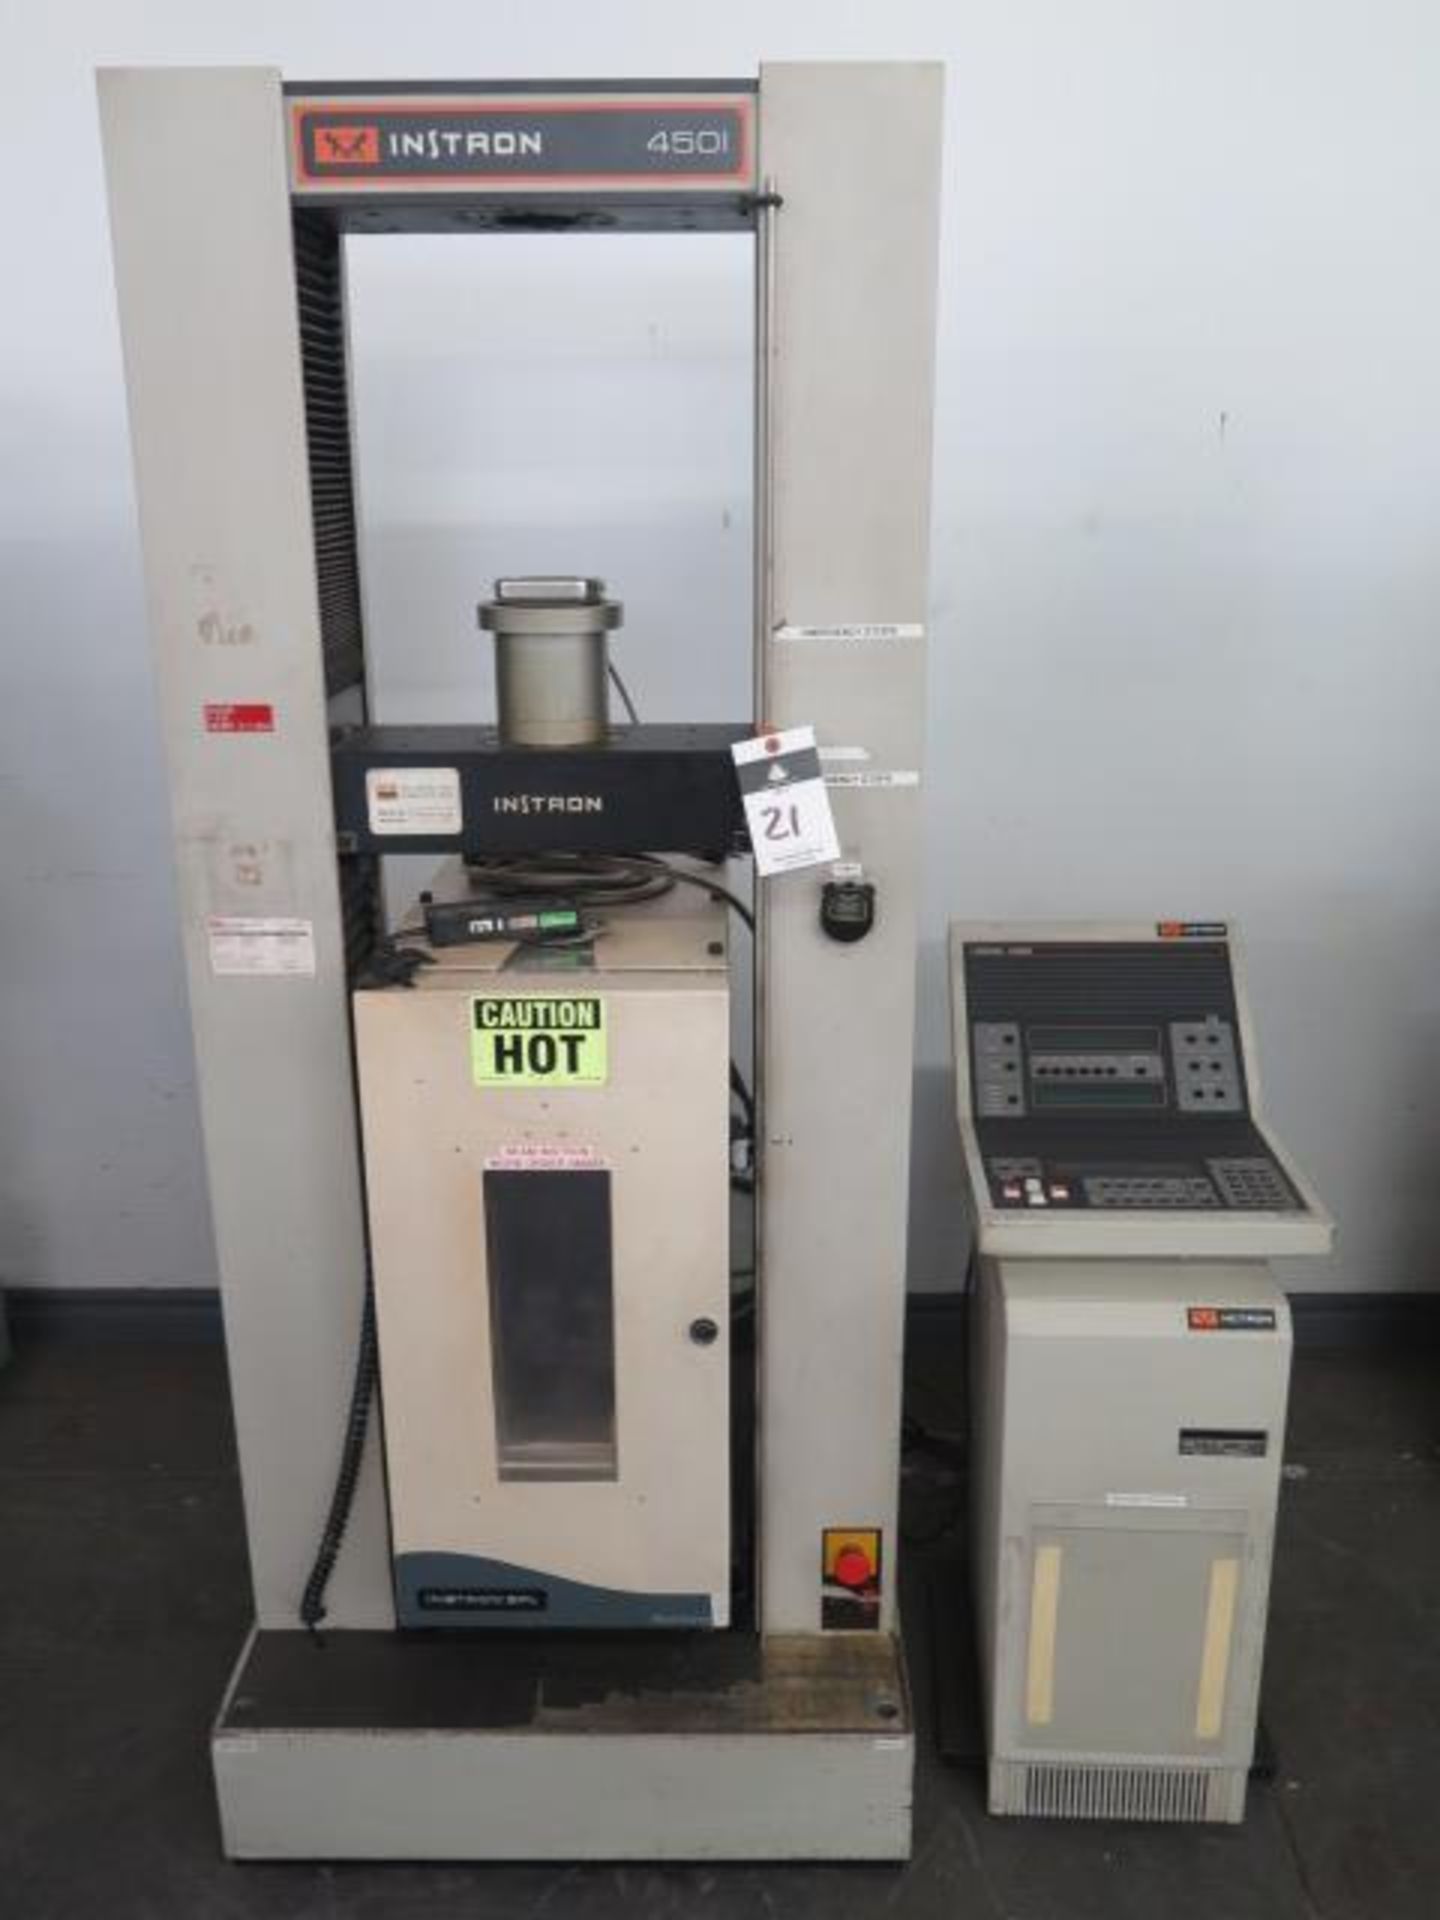 Instron 4501 Tensile Tester s/n H3105 w/ Digital Controls, Heat Wave Test Chamber (Oven)